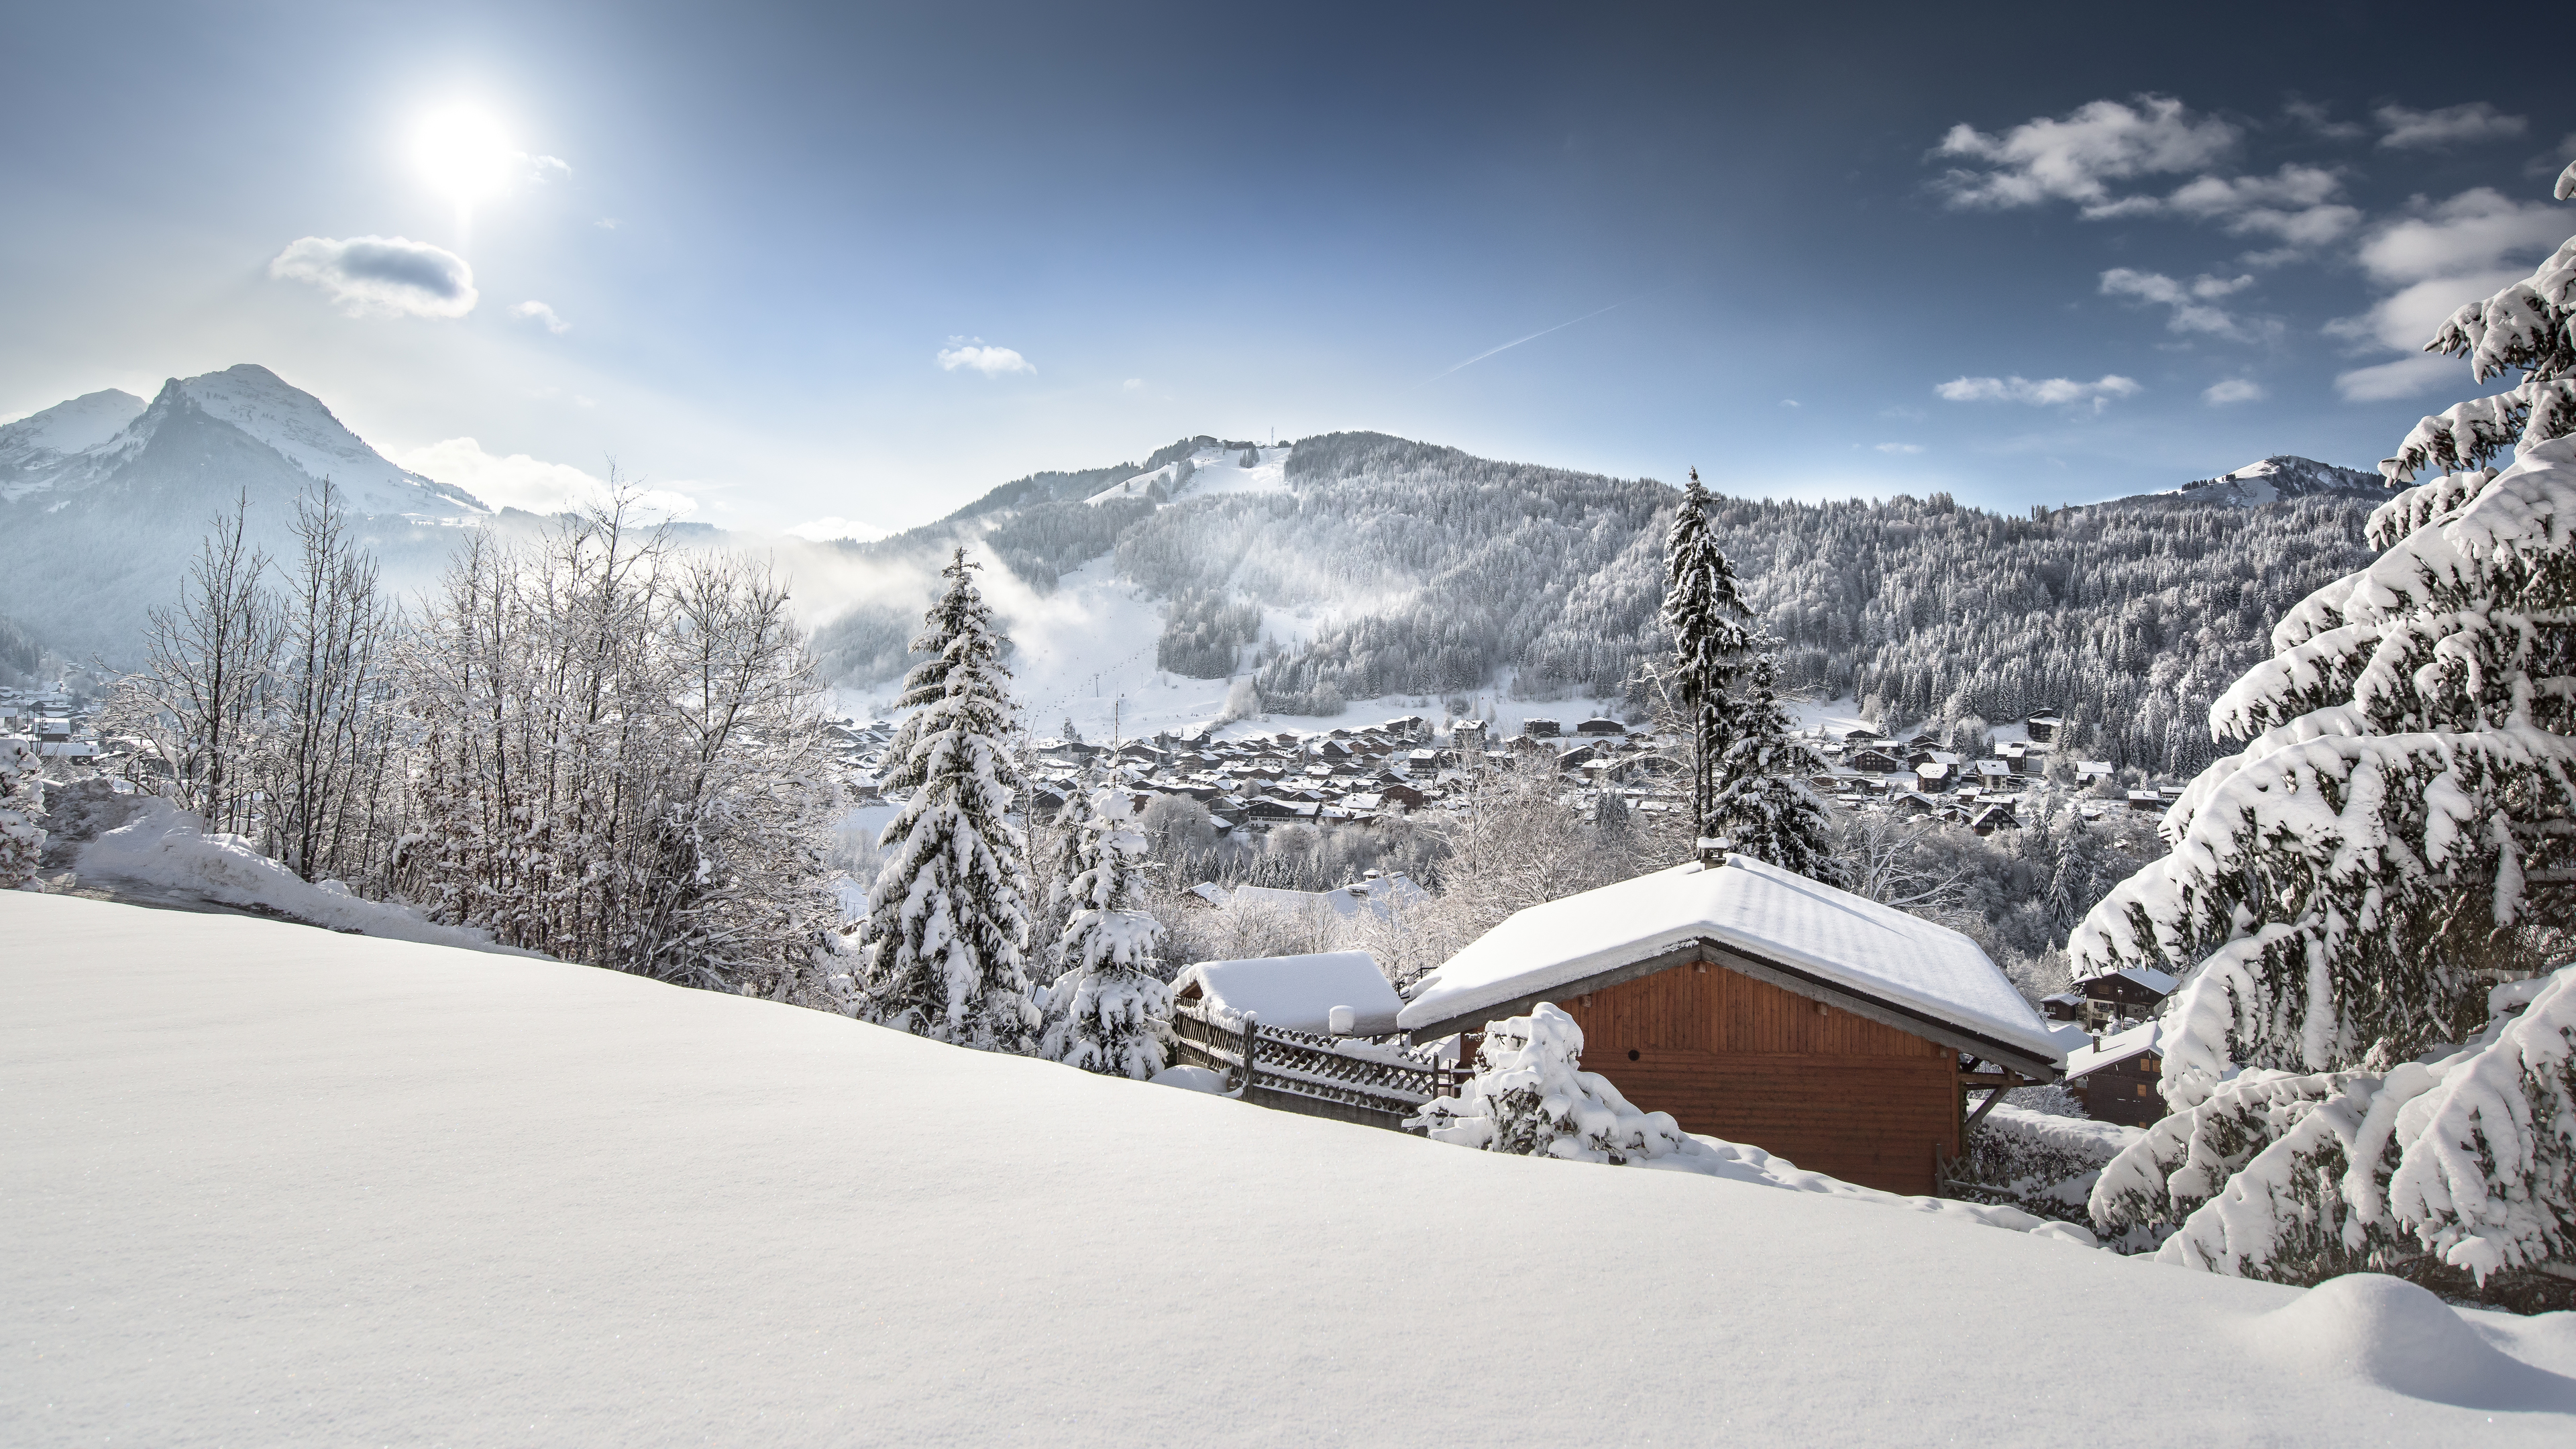 It's the perfect destination for a trip to the slopes